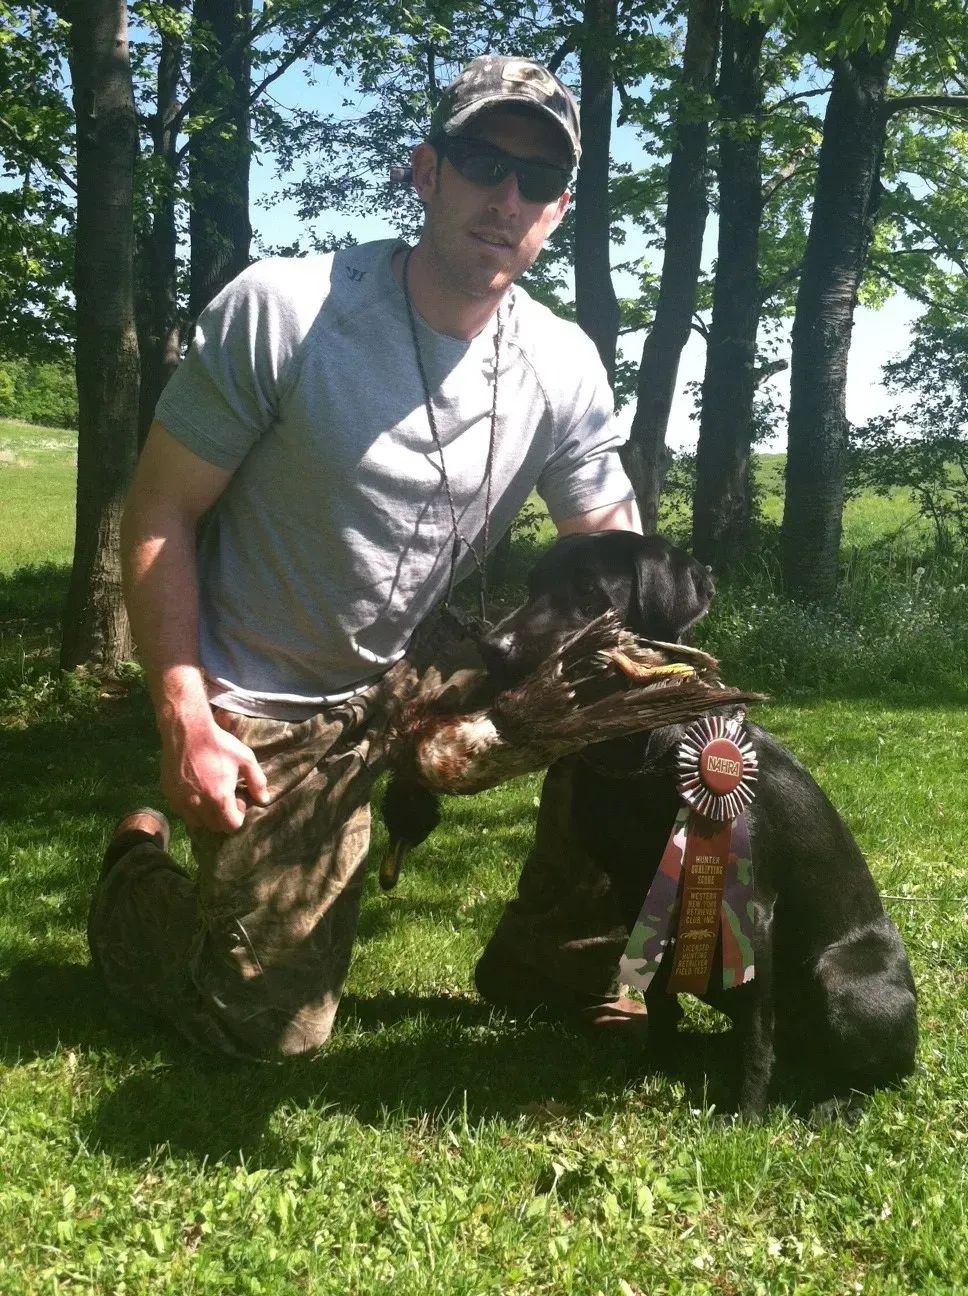 Black Labrador retriever with 1st place ribbon and owner, Dennis Tyler